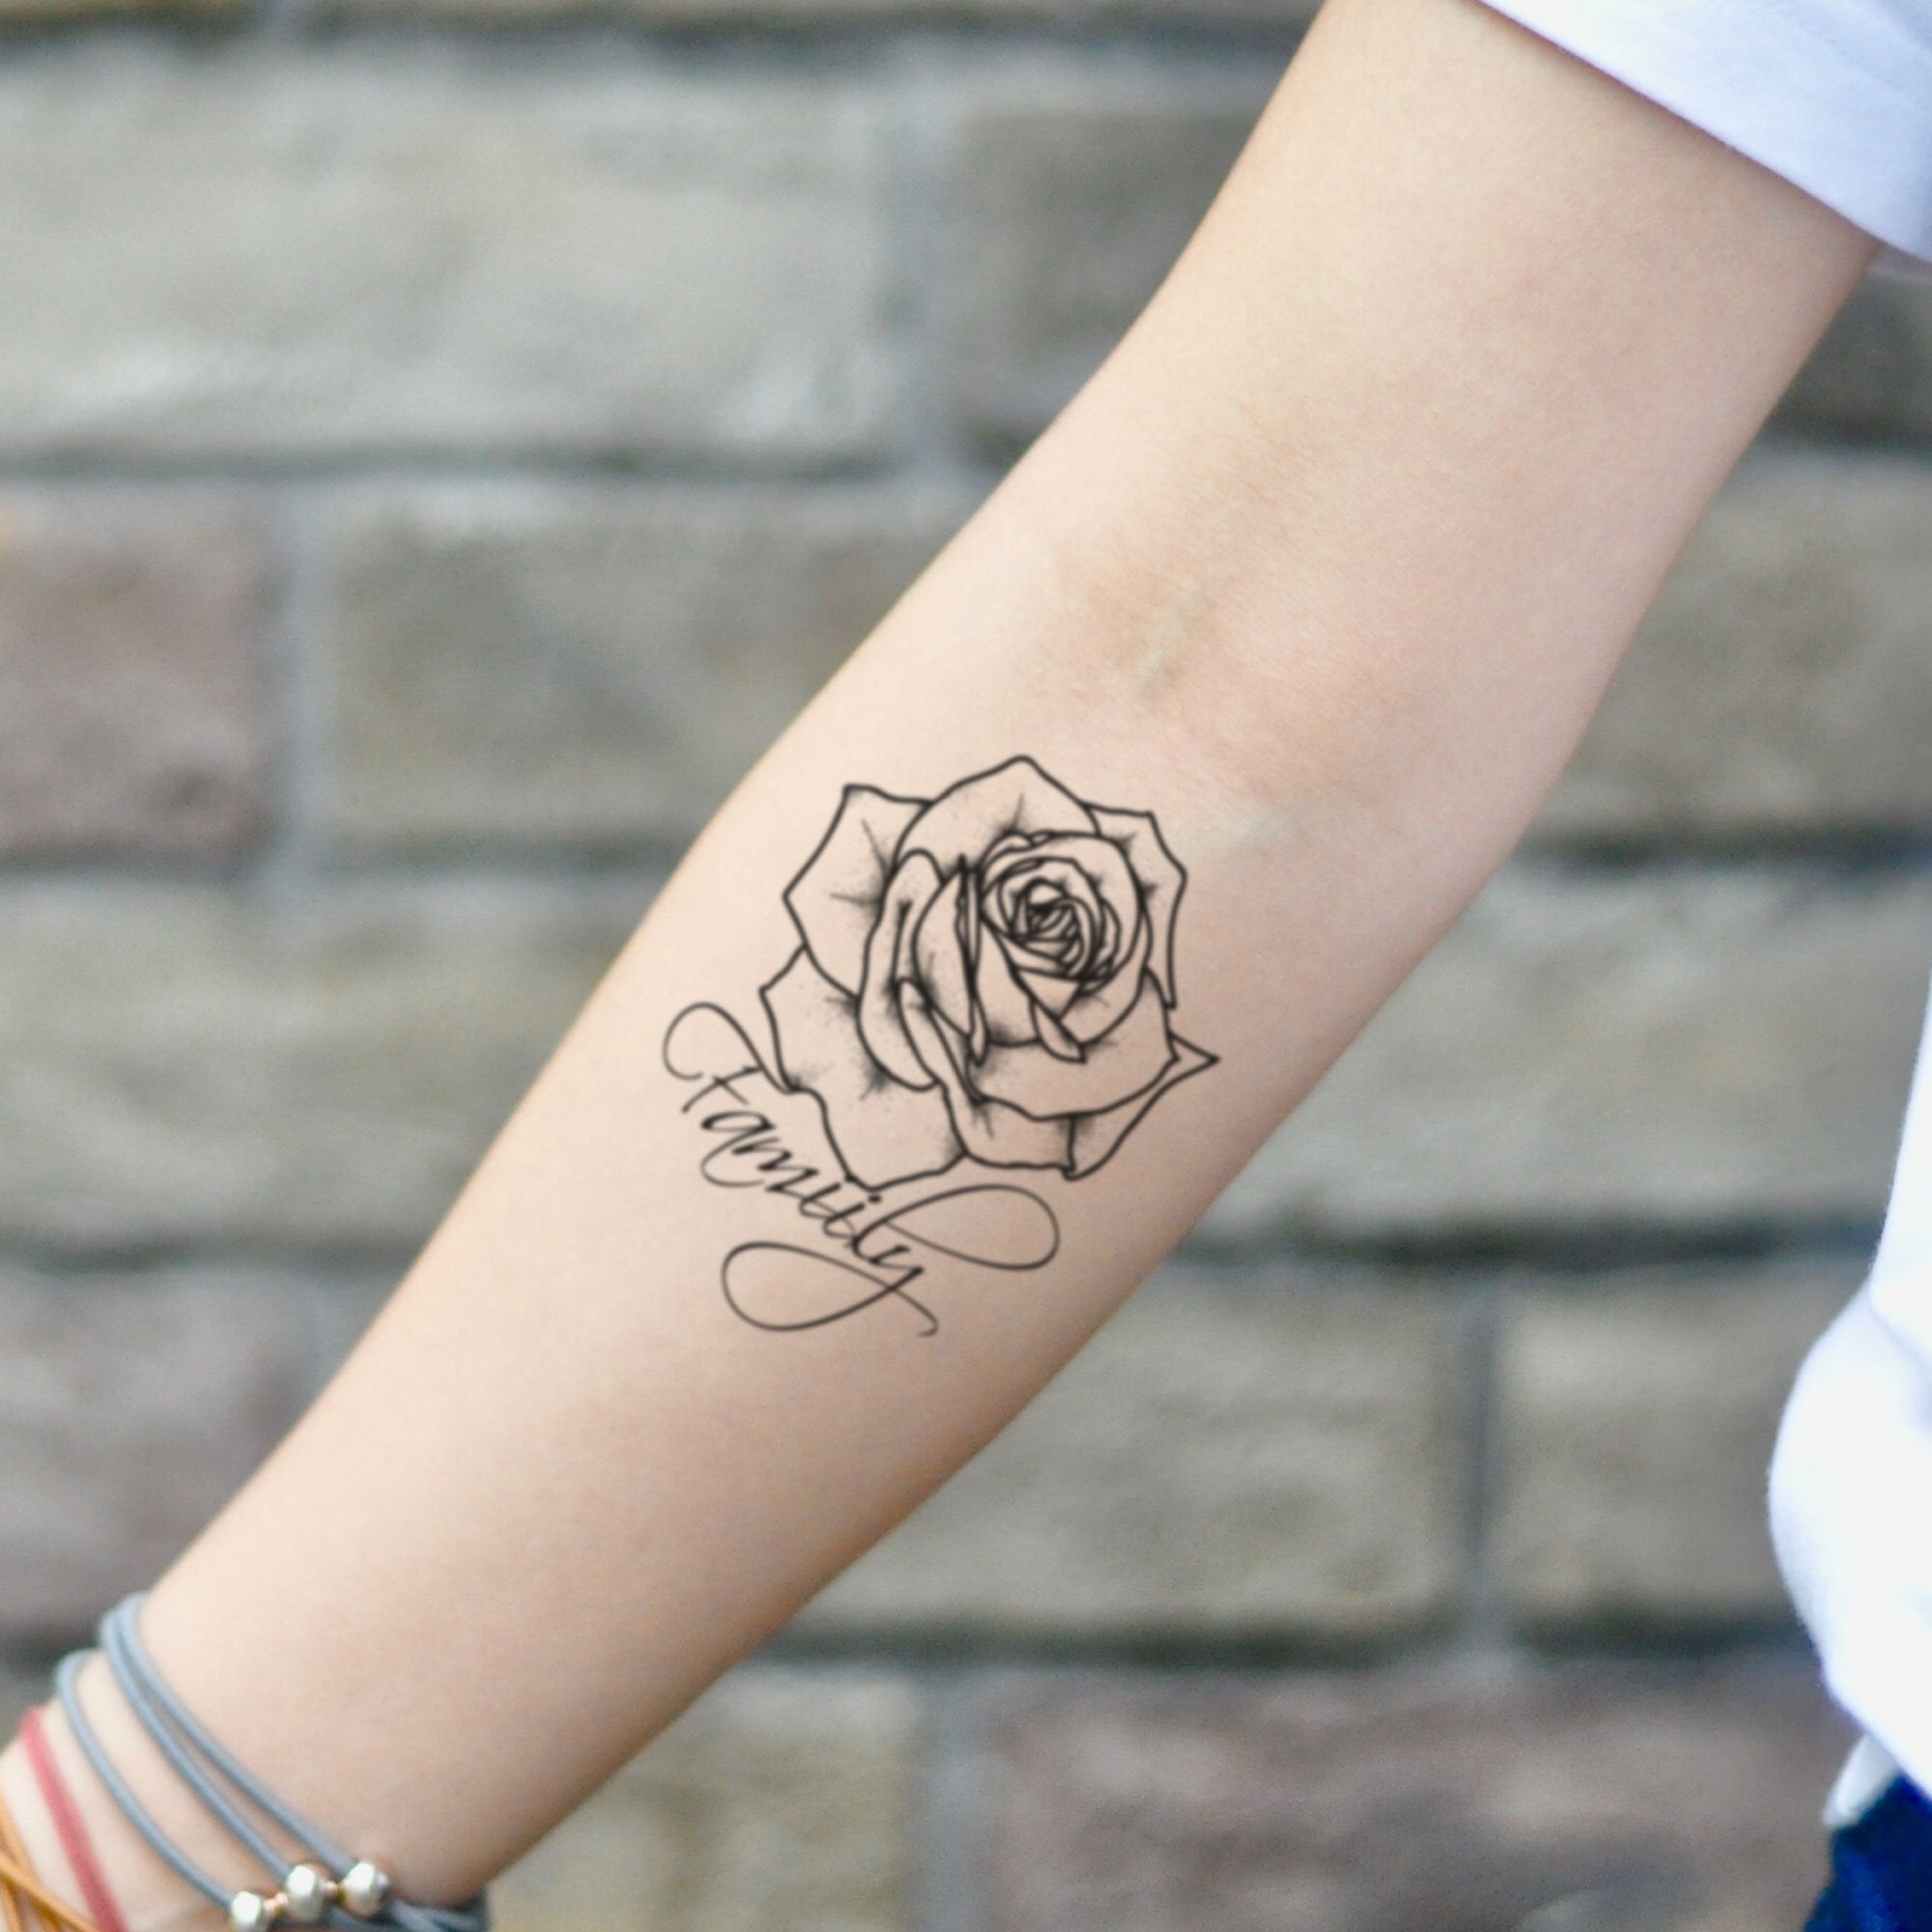 Flower Tattoos Archives  ThingsInk